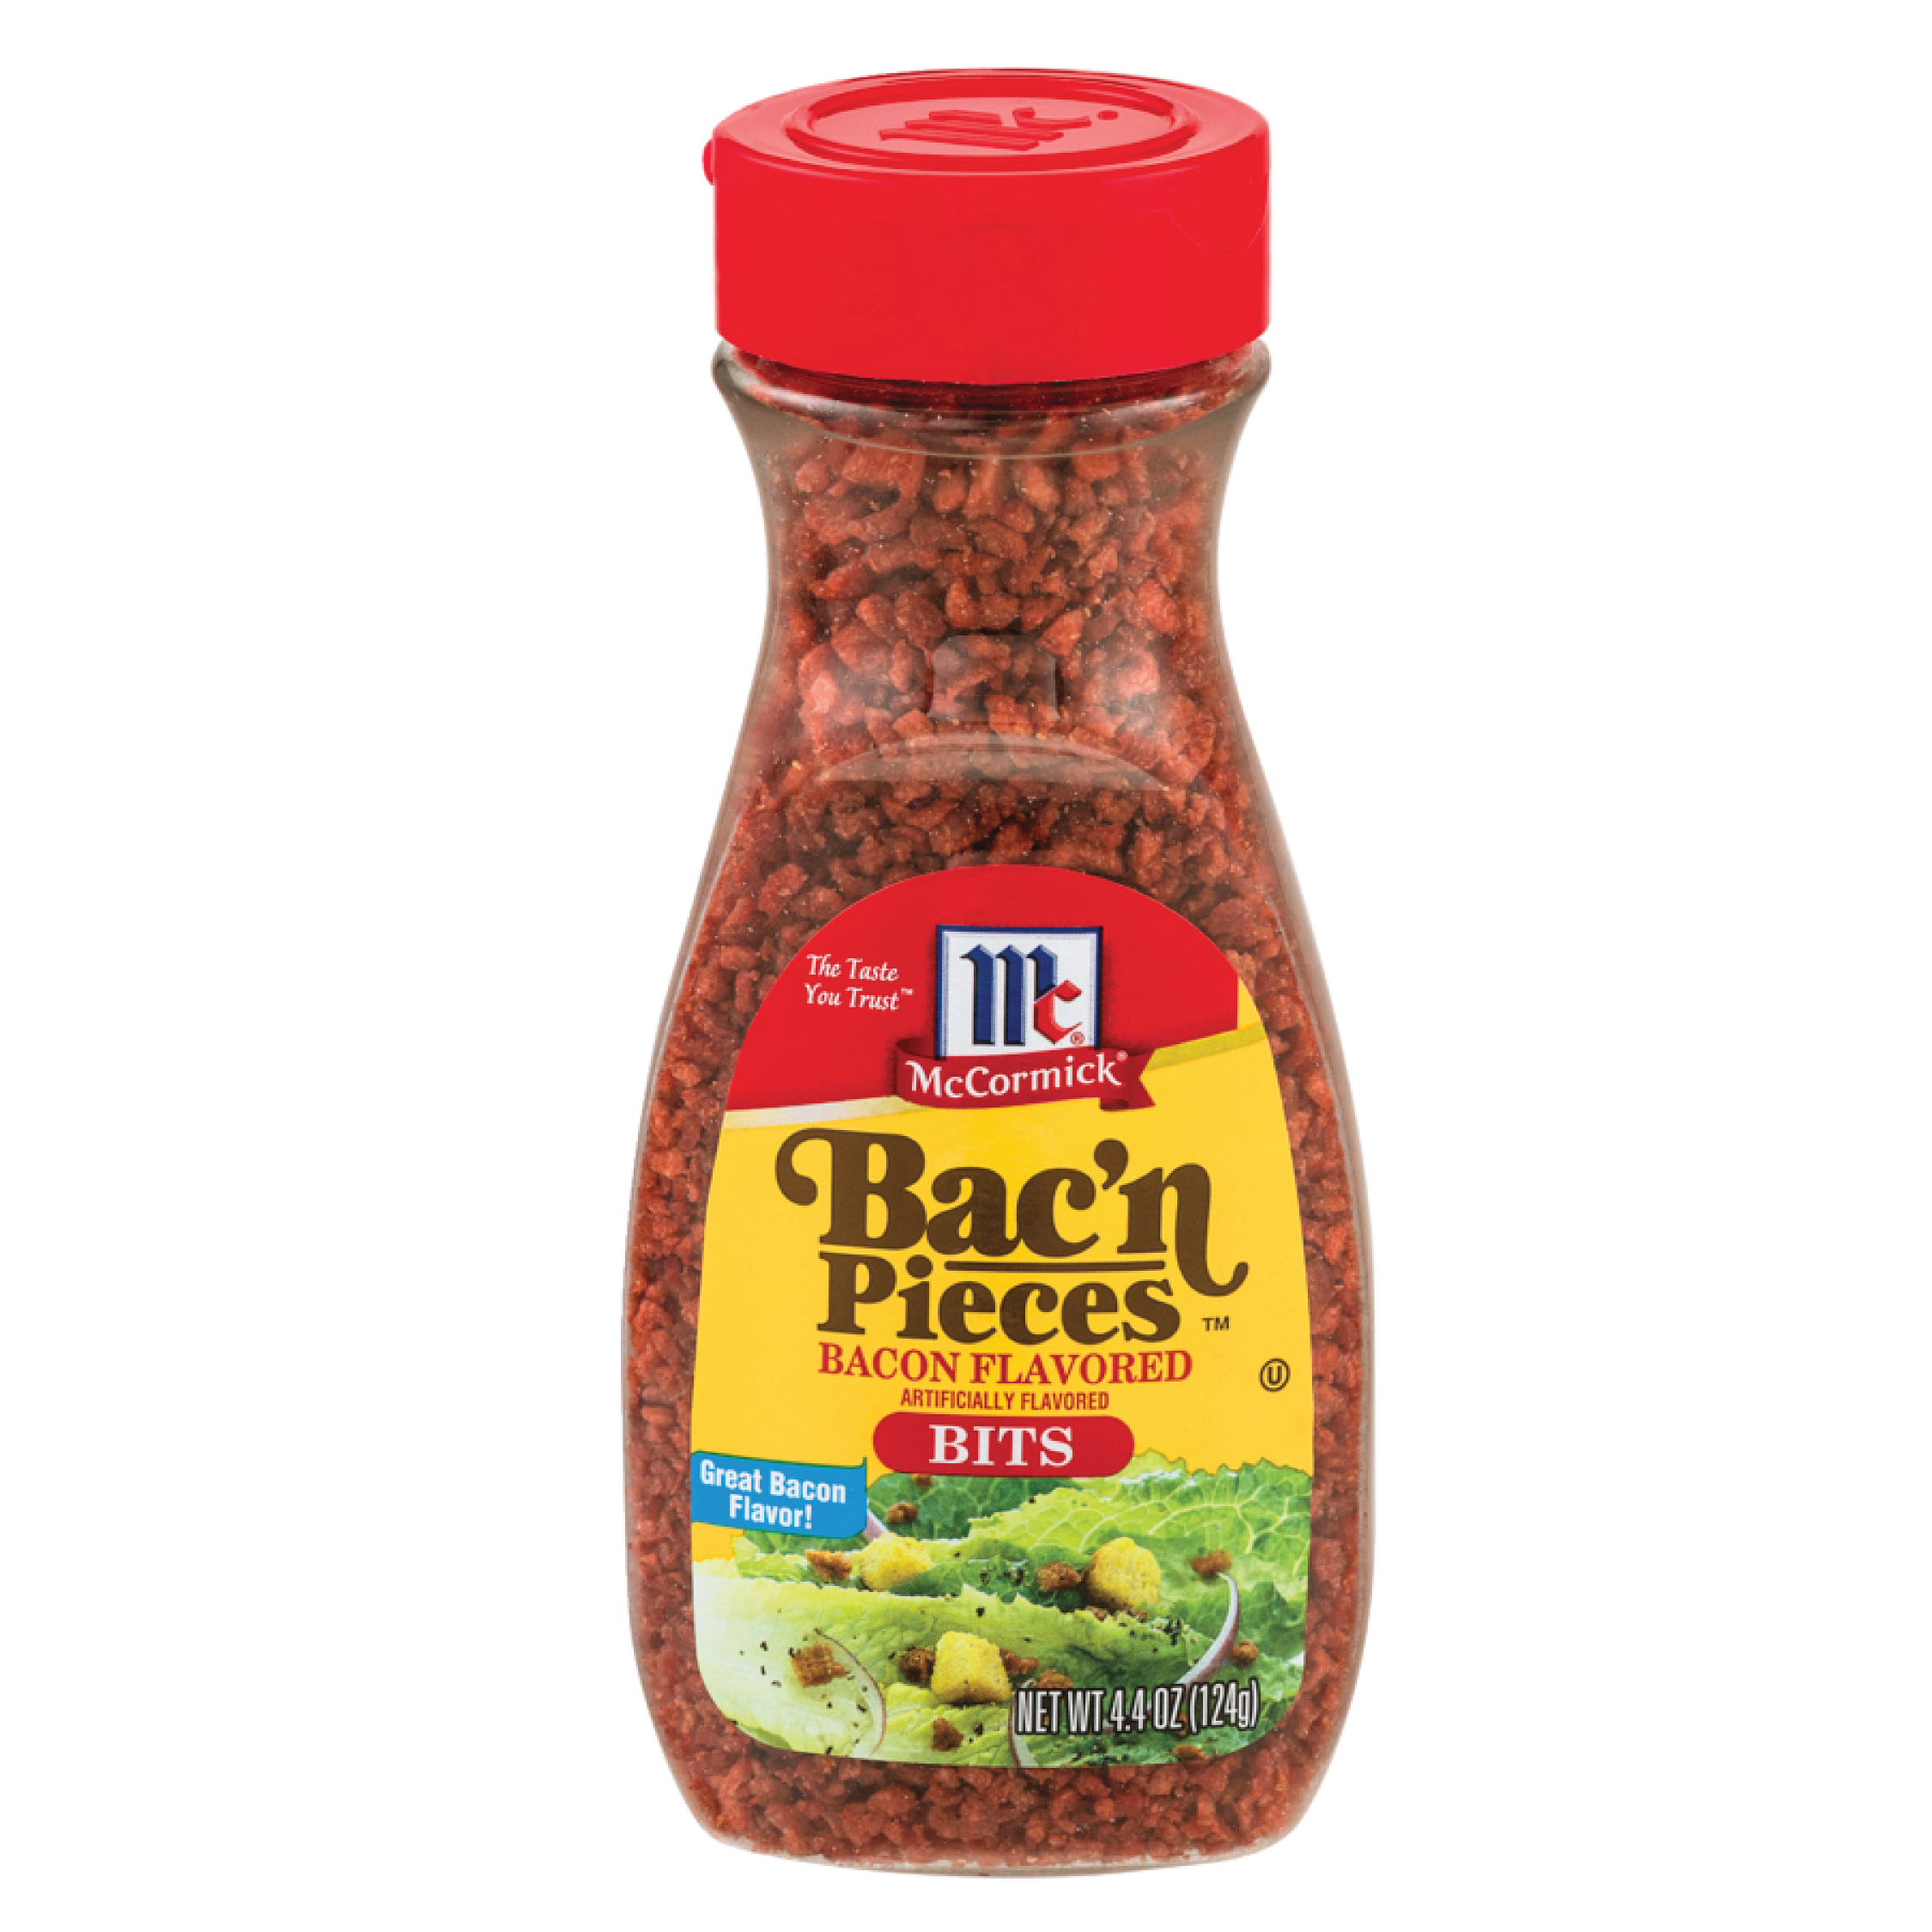 McCormick Bac'n Pieces Original Bacon Flavored Bits Topping 4.4oz